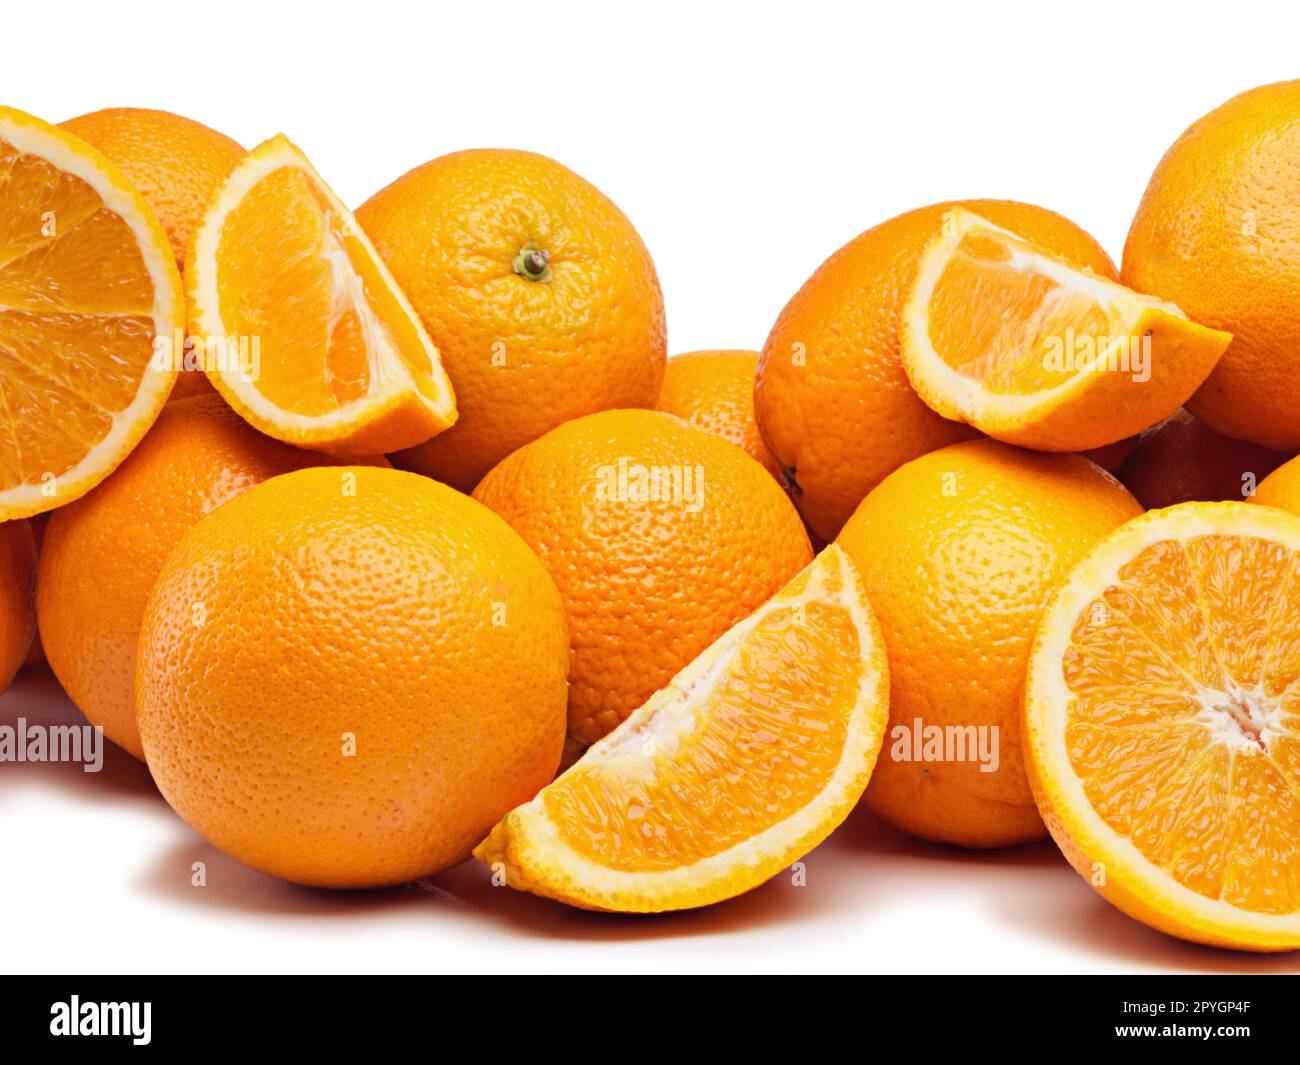 An abundance of citrus. Studio shot of a pile of oranges against a white background. Stock Photo